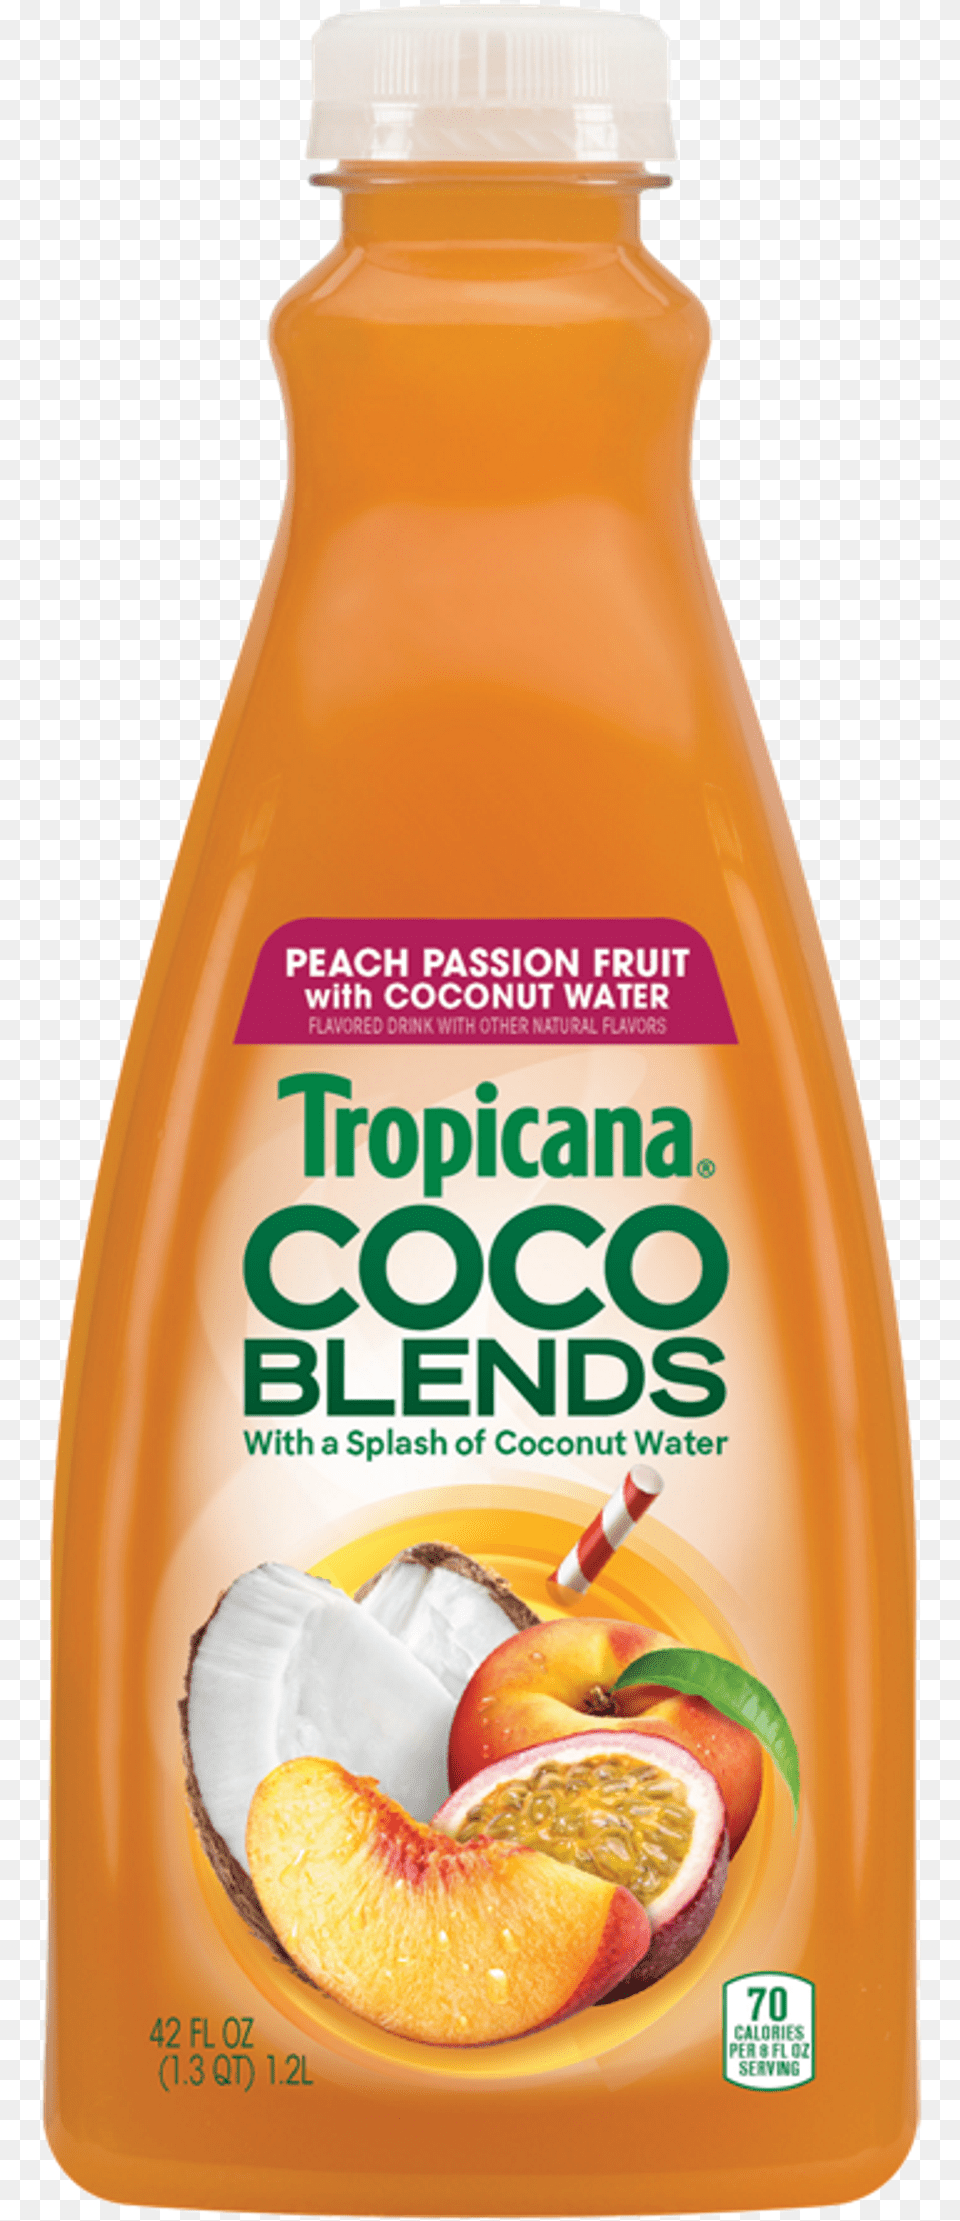 Tropicana Launches Coconut Water Based Juice Drink Tropicana Peach Passion Fruit With Coconut Water Coco, Beverage, Food, Ketchup, Orange Juice Png Image